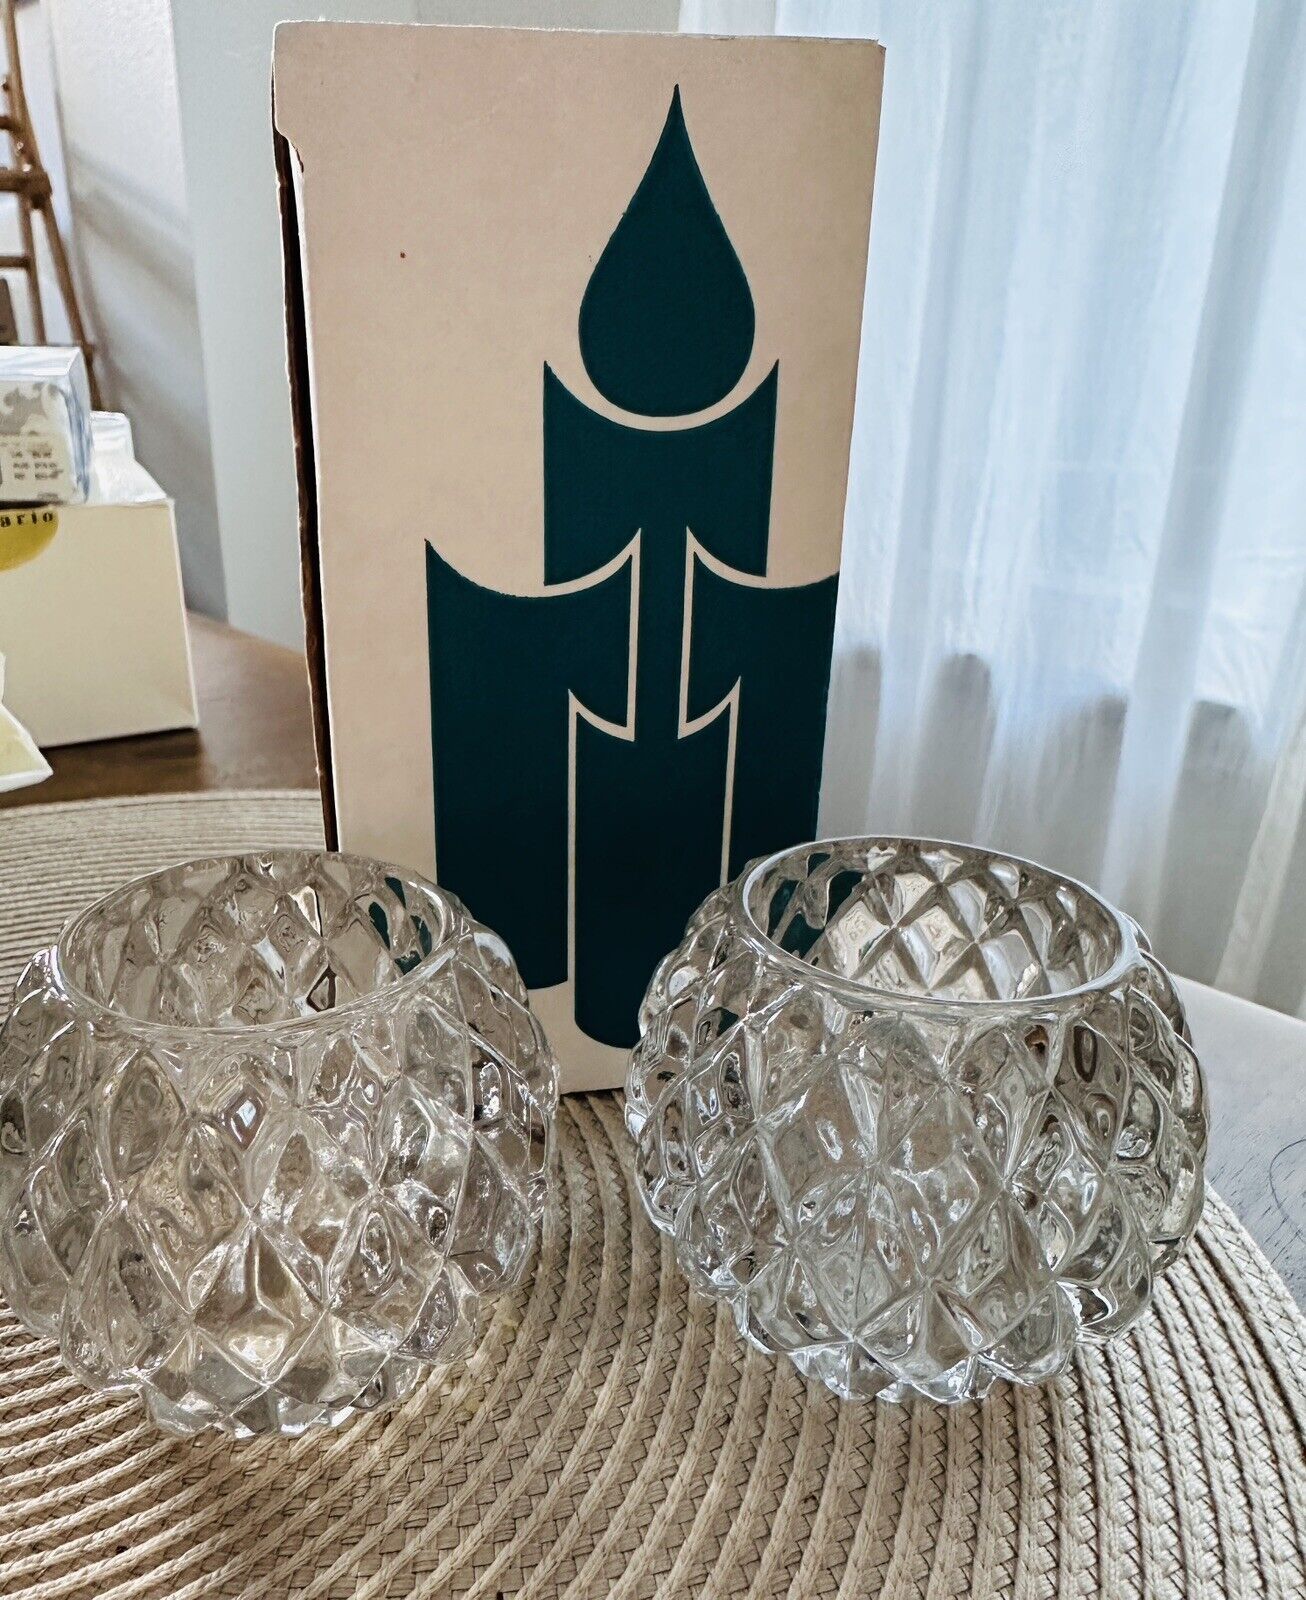 Set of 2 New Partylite Illusions P0463 Swirl Glass Votive With Candles Holders